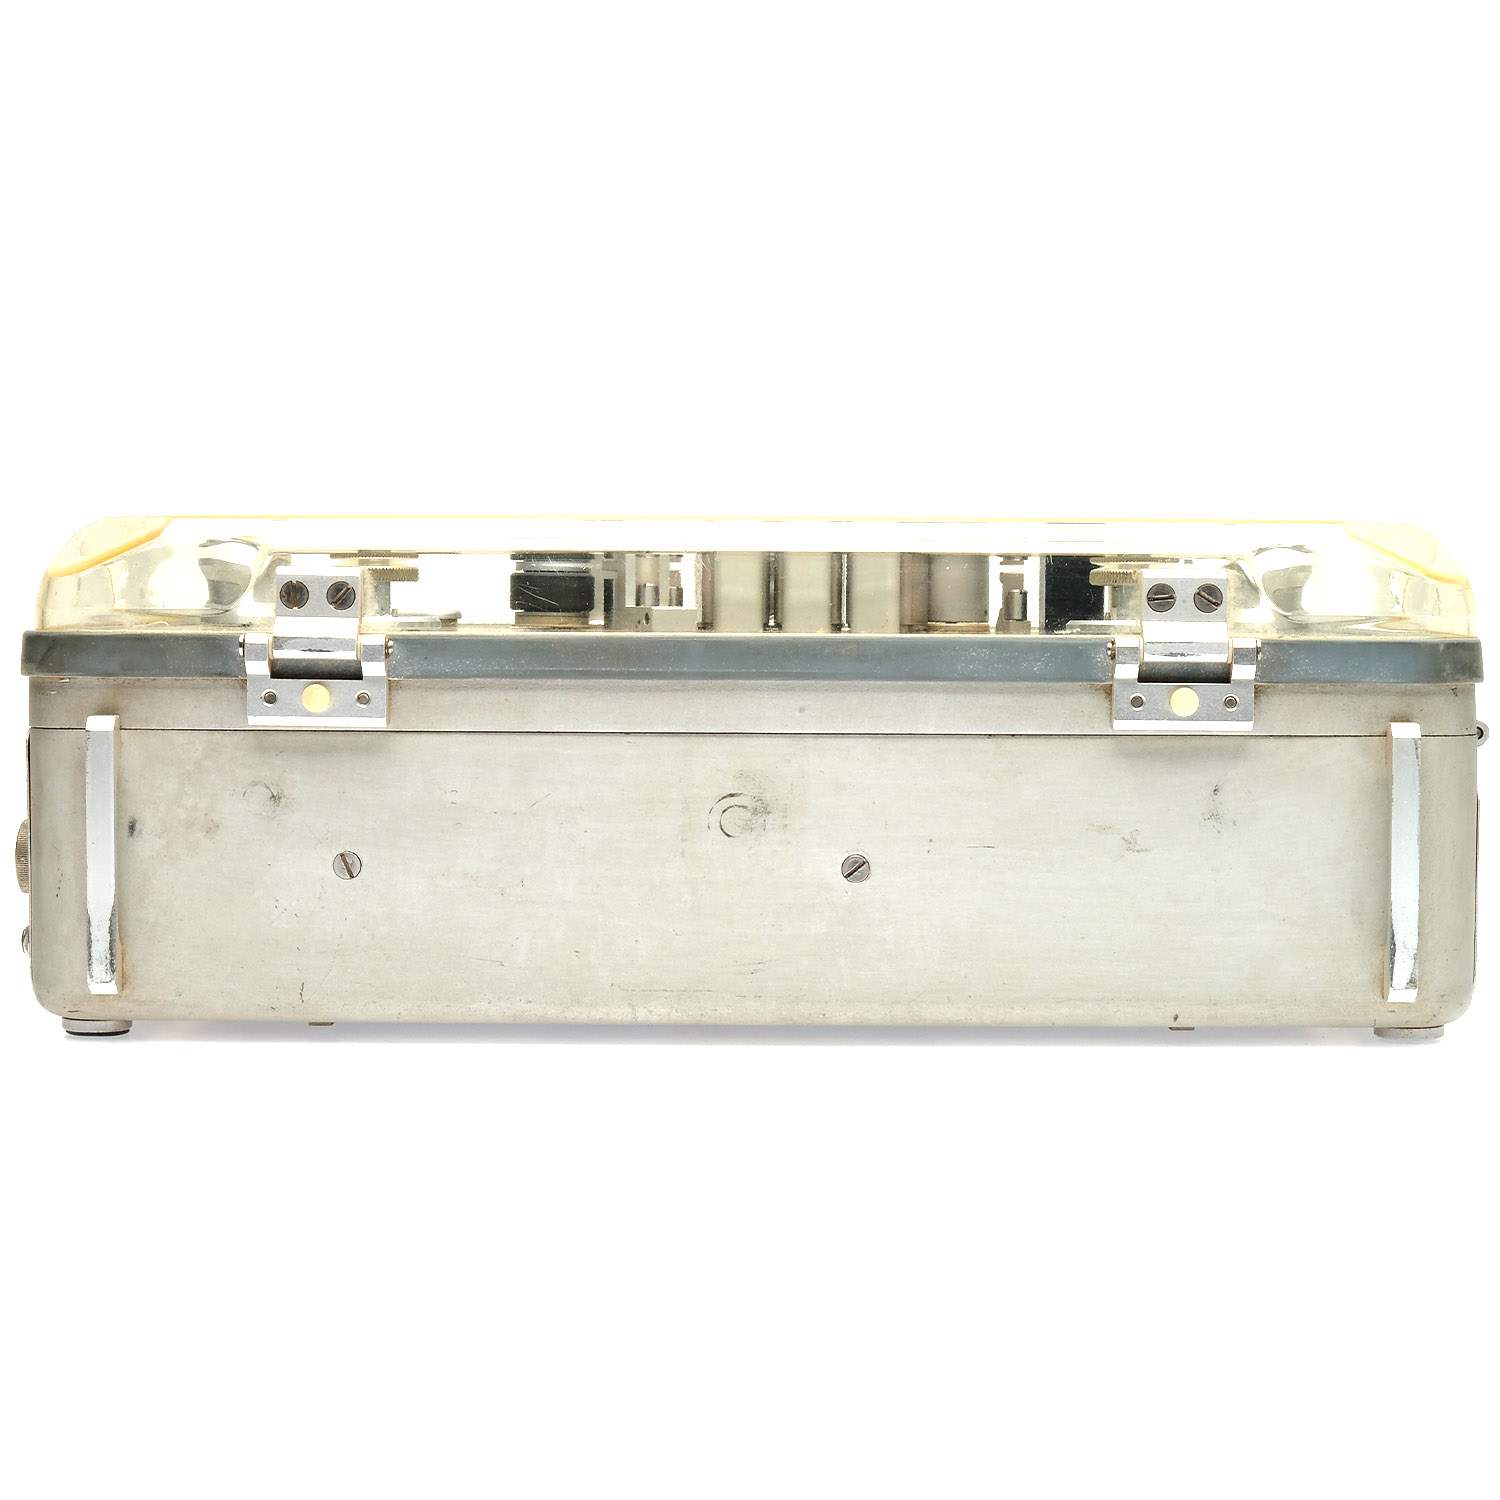 Nagra IV-BL, Case as-is 1605902